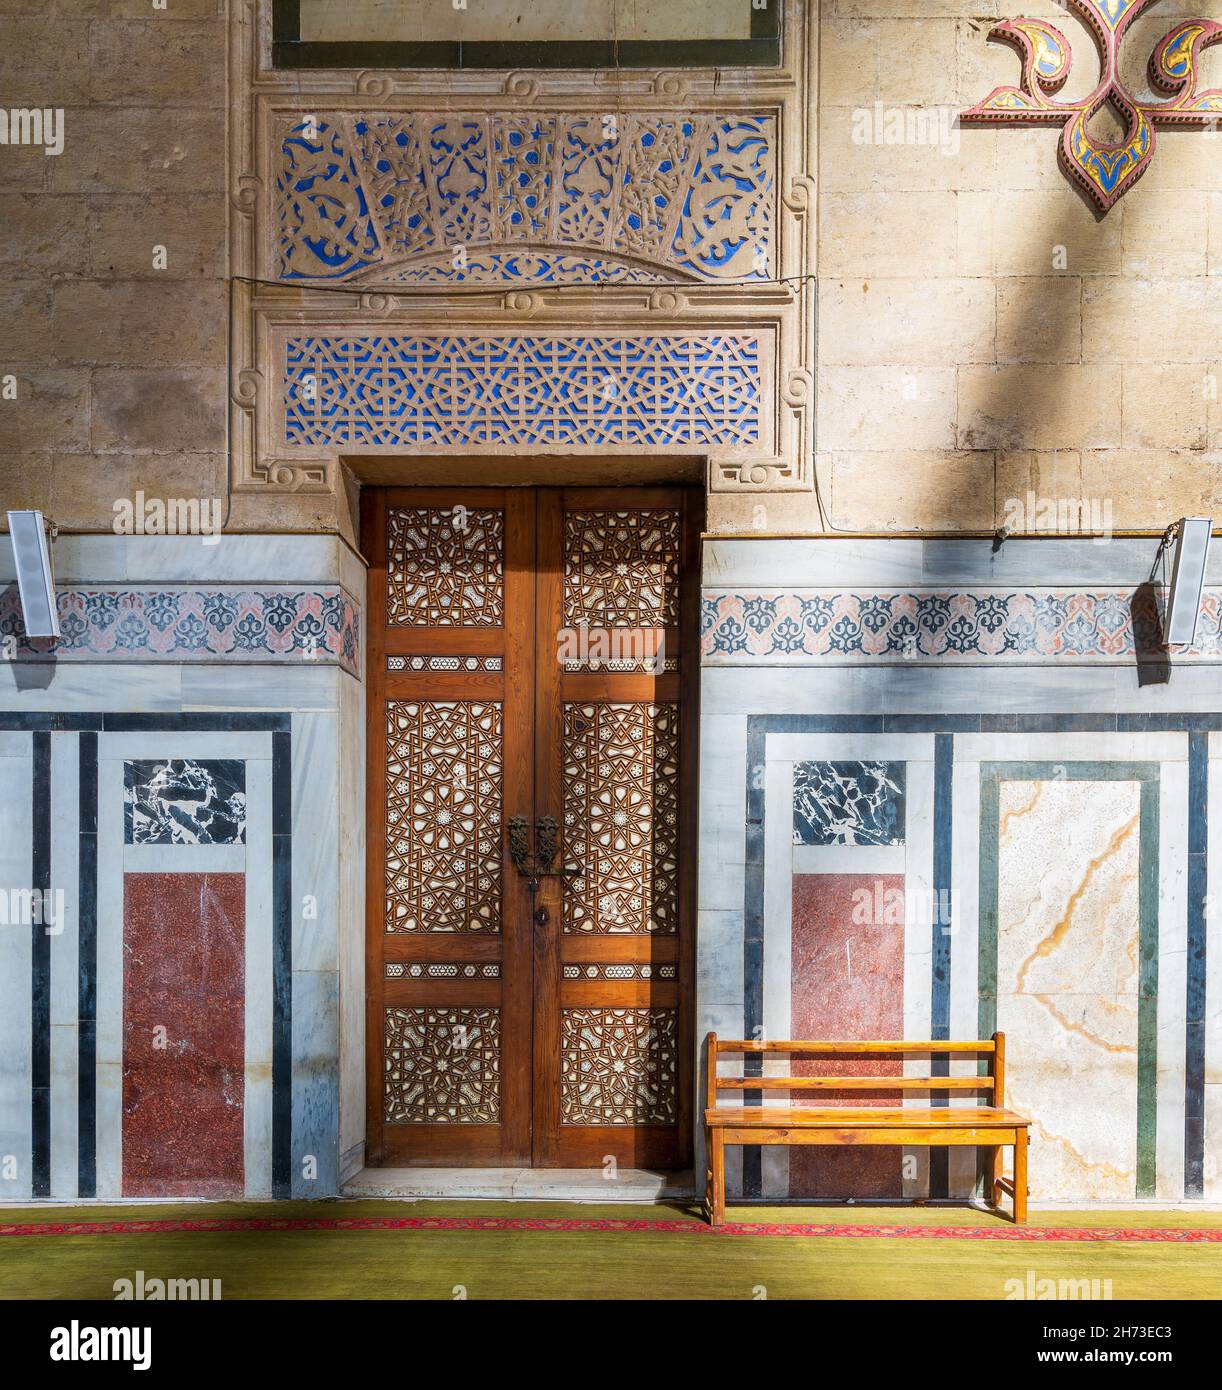 Ornamental wooden door, marble mosaic decorated walls, wooden bench, and floor lit by sunlight beams, in public historic Al Rifai Mosque, Cairo, Egypt Stock Photo